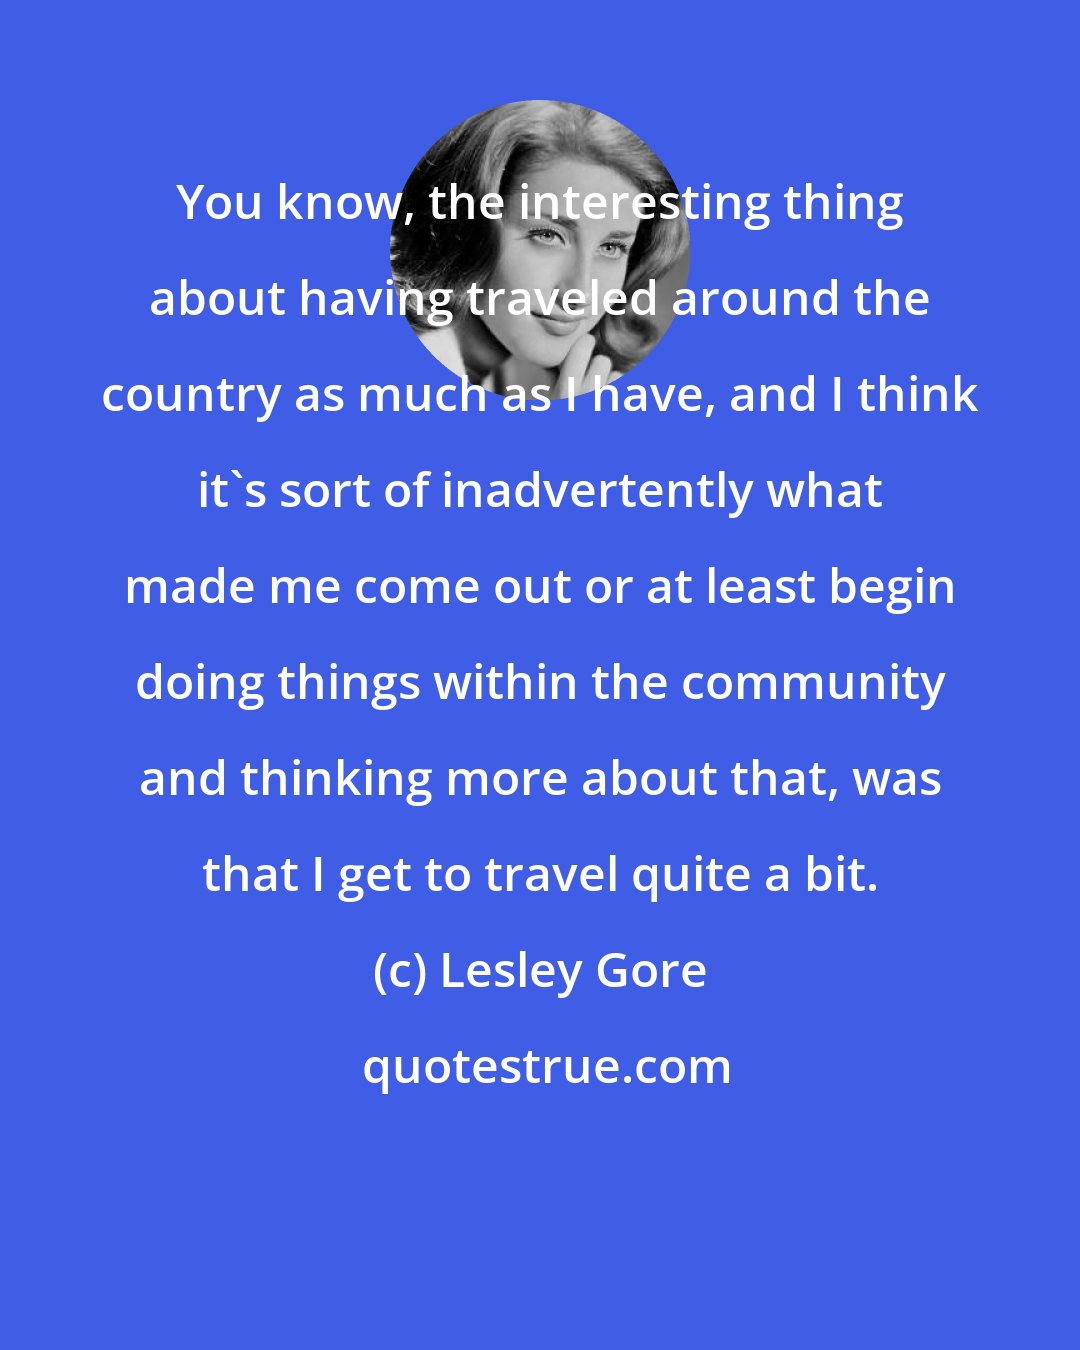 Lesley Gore: You know, the interesting thing about having traveled around the country as much as I have, and I think it's sort of inadvertently what made me come out or at least begin doing things within the community and thinking more about that, was that I get to travel quite a bit.